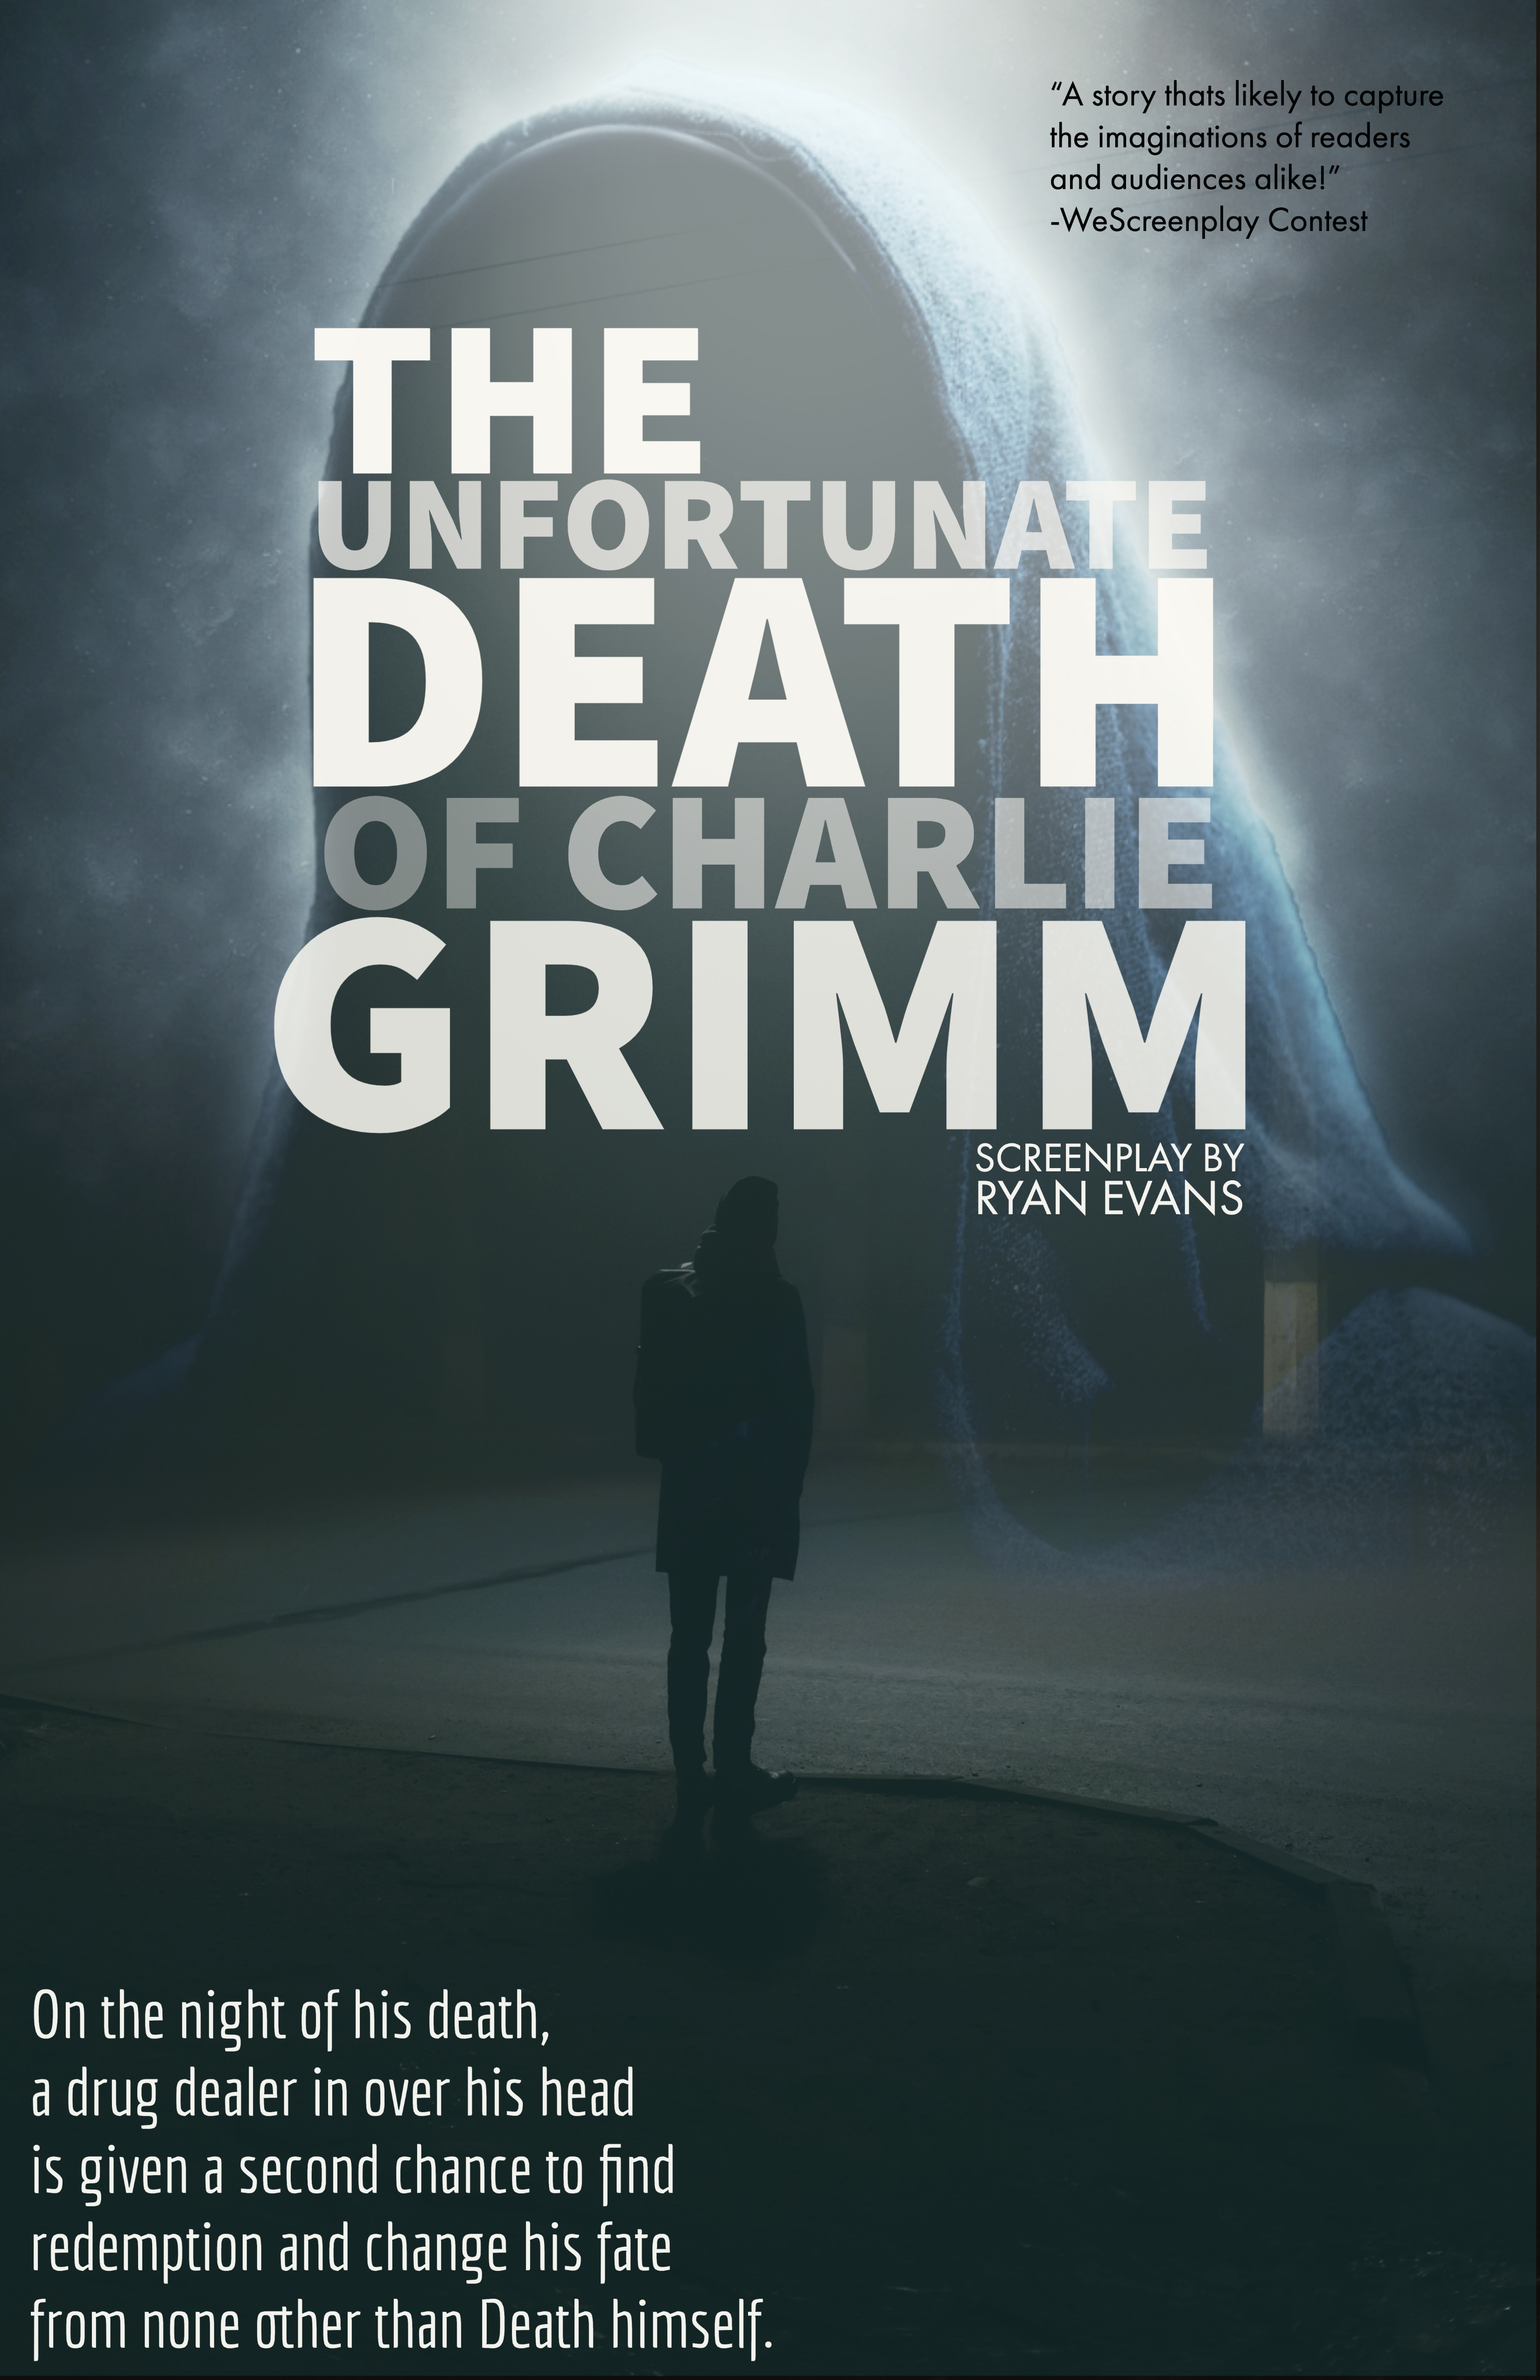 THE UNFORTUNATE DEATH OF CHARLIE GRIMM